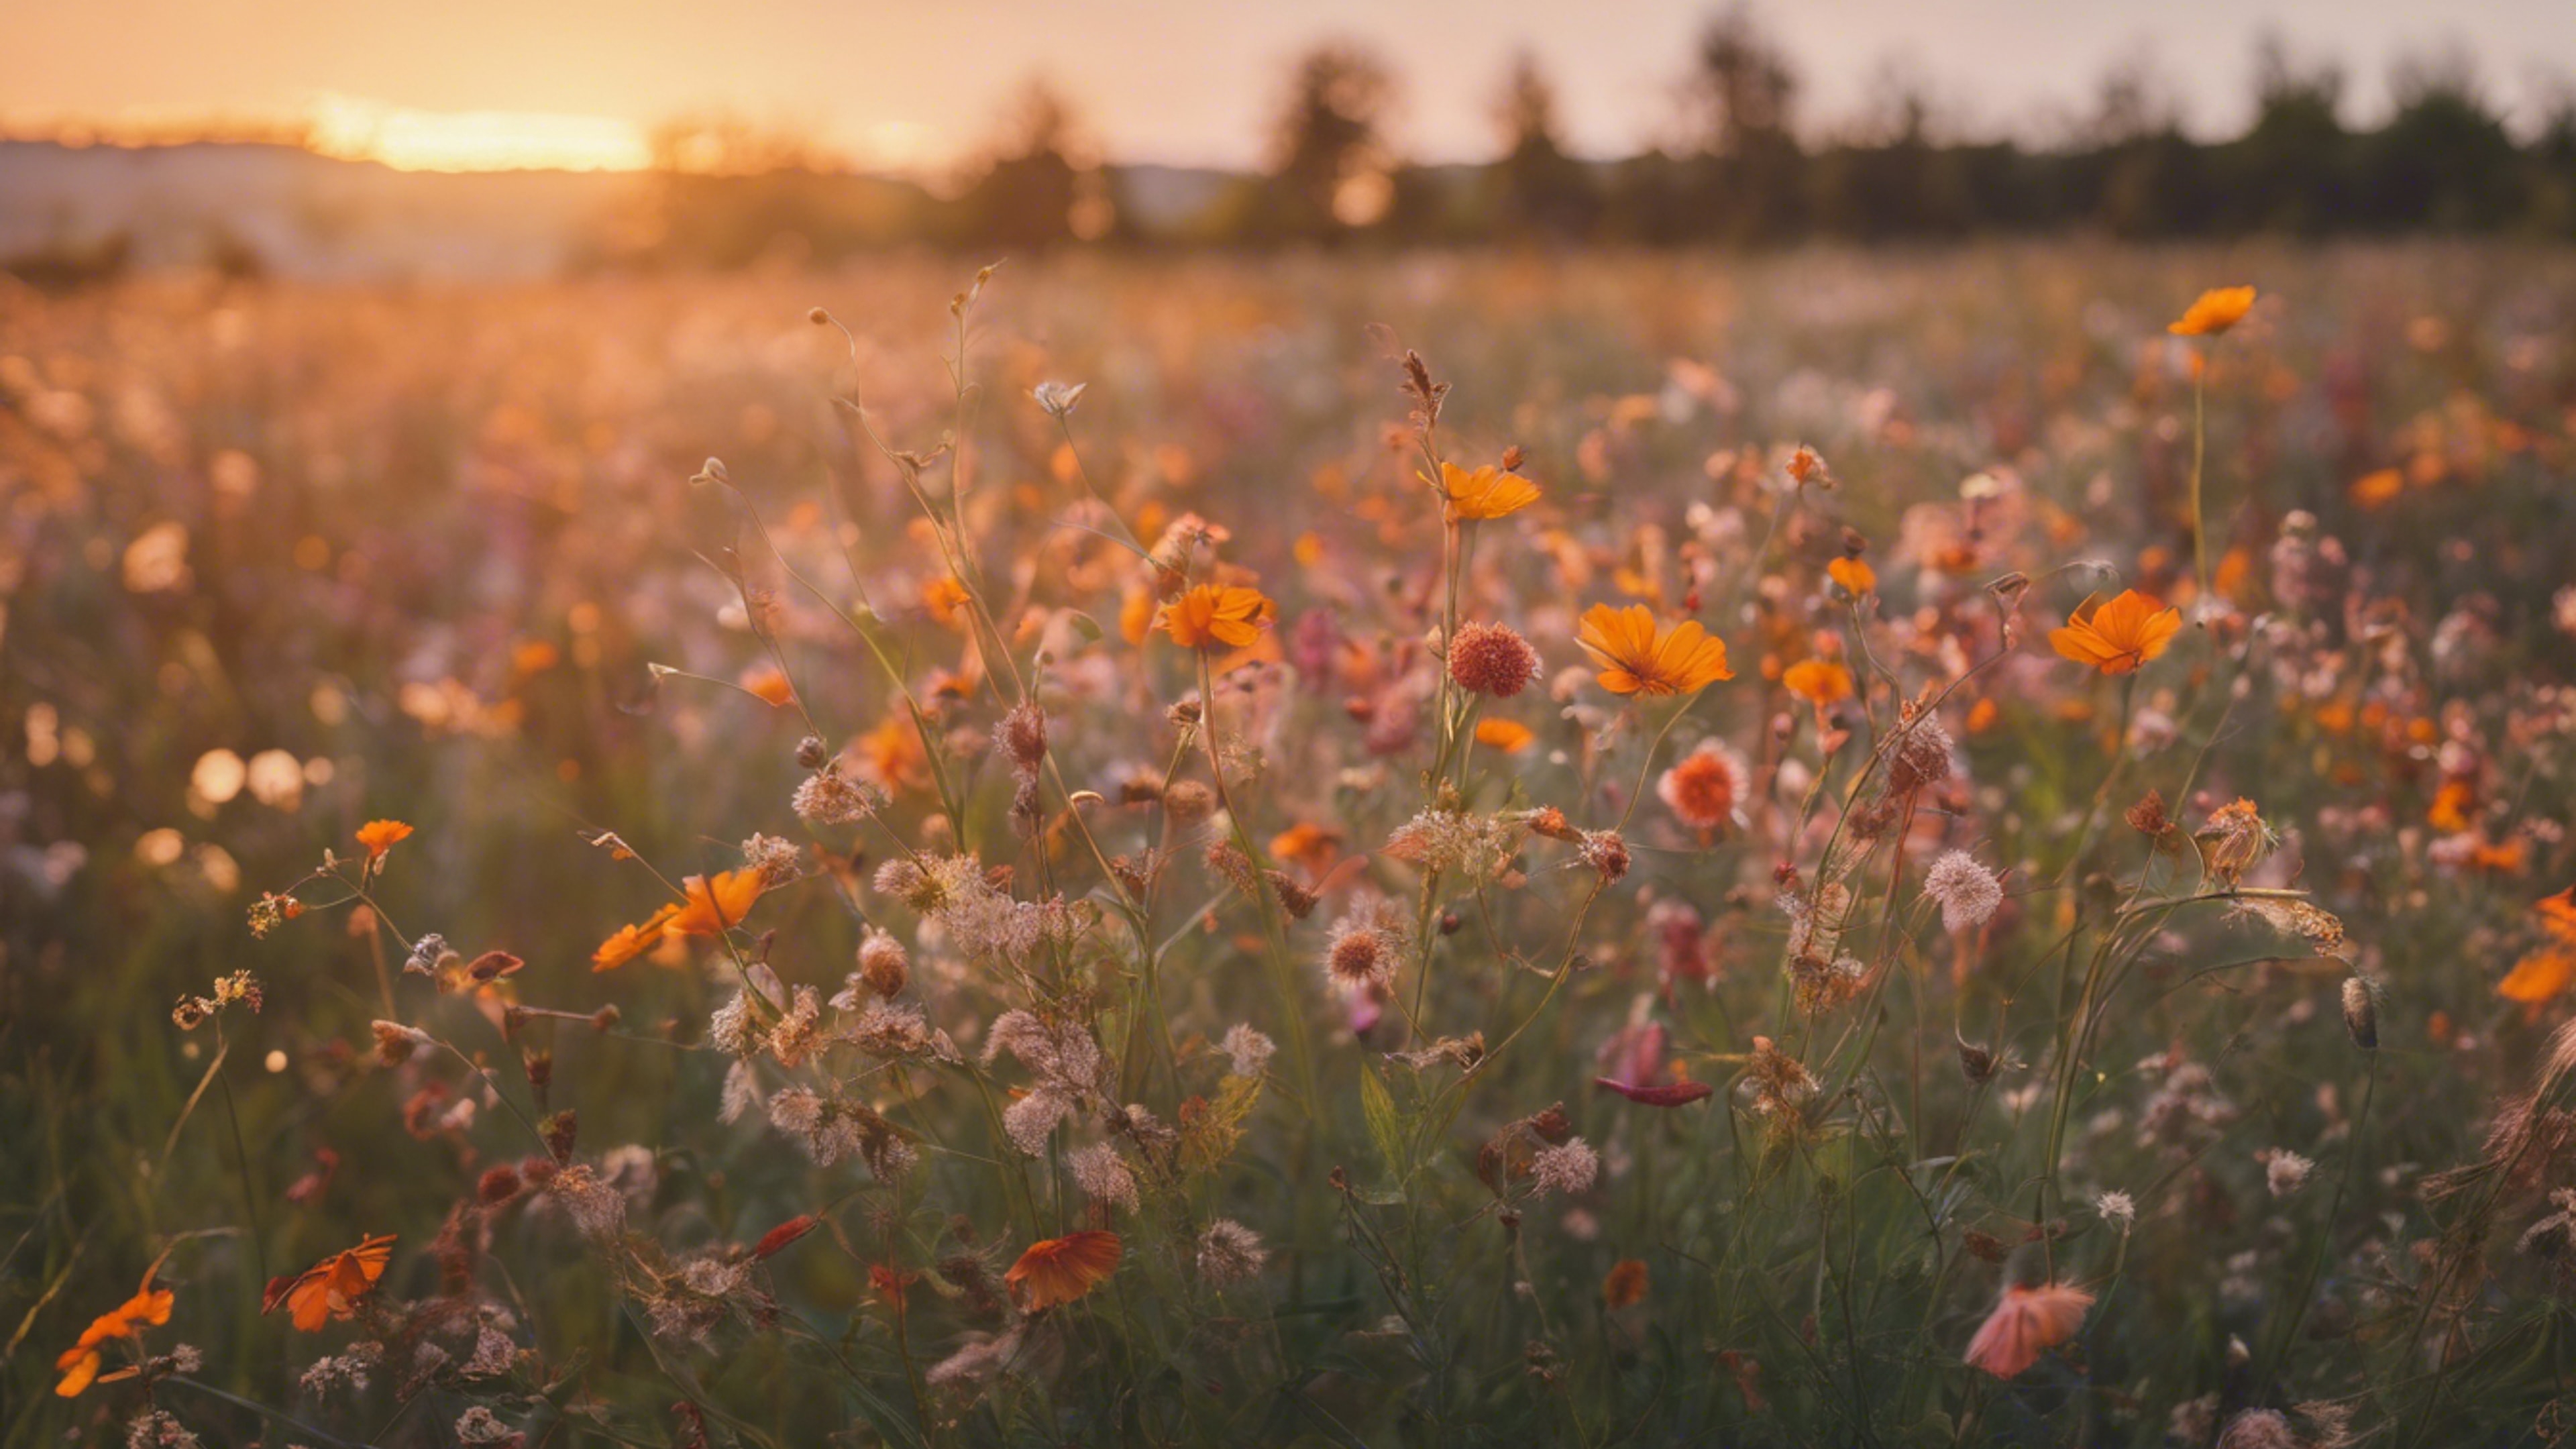 A nostalgic field of wildflowers in sunset hues. Tapeta[1a5d684a5d8746a6914f]